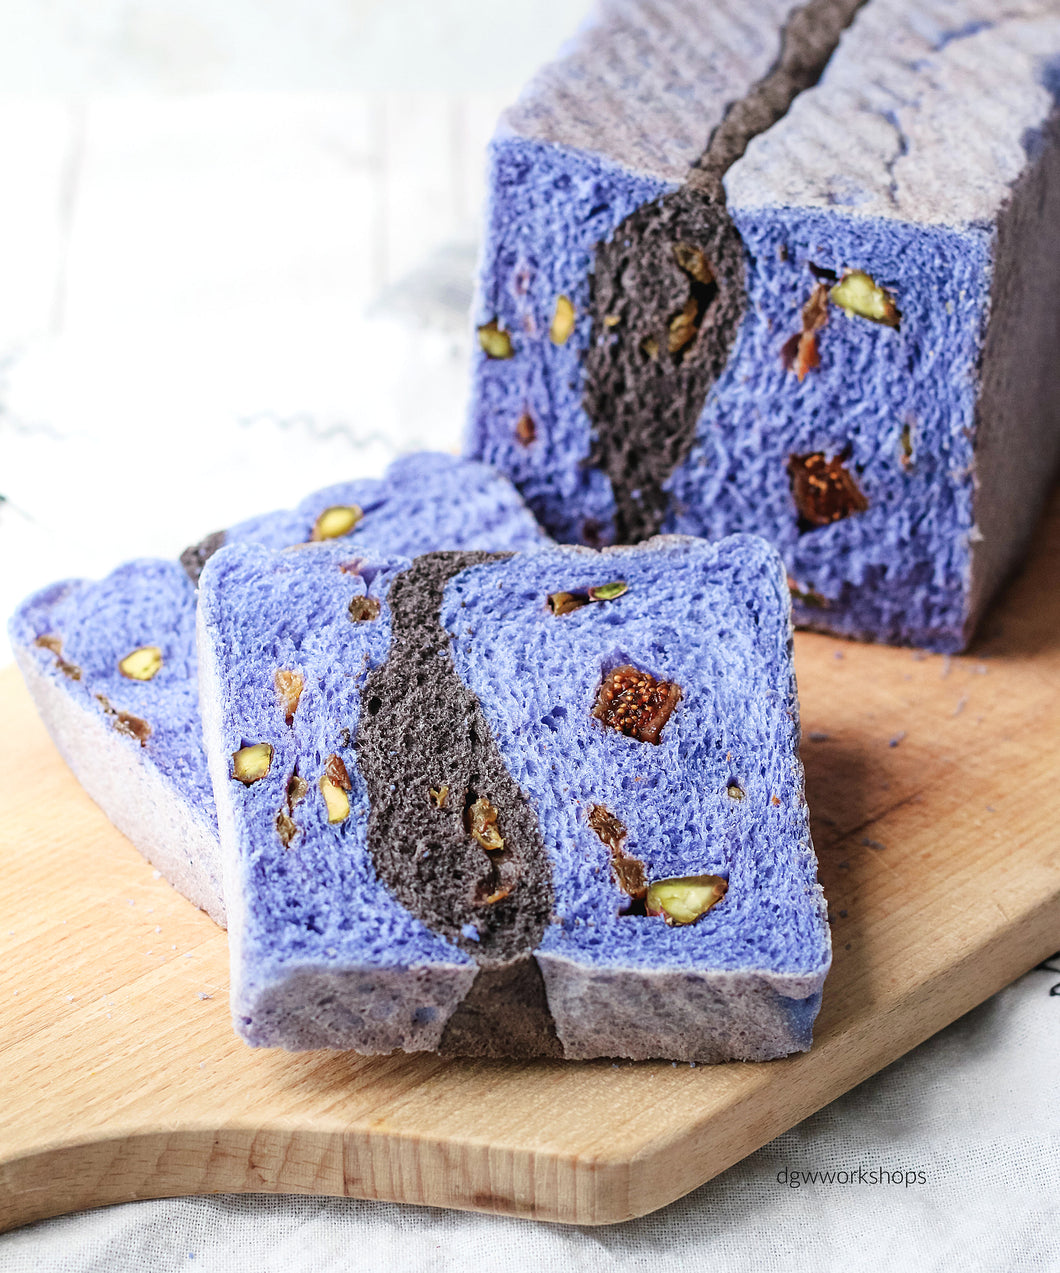 Hands-on Van Gogh Starry Night Loaf and Chocolate (or Matcha) Stripey Buns Workshop